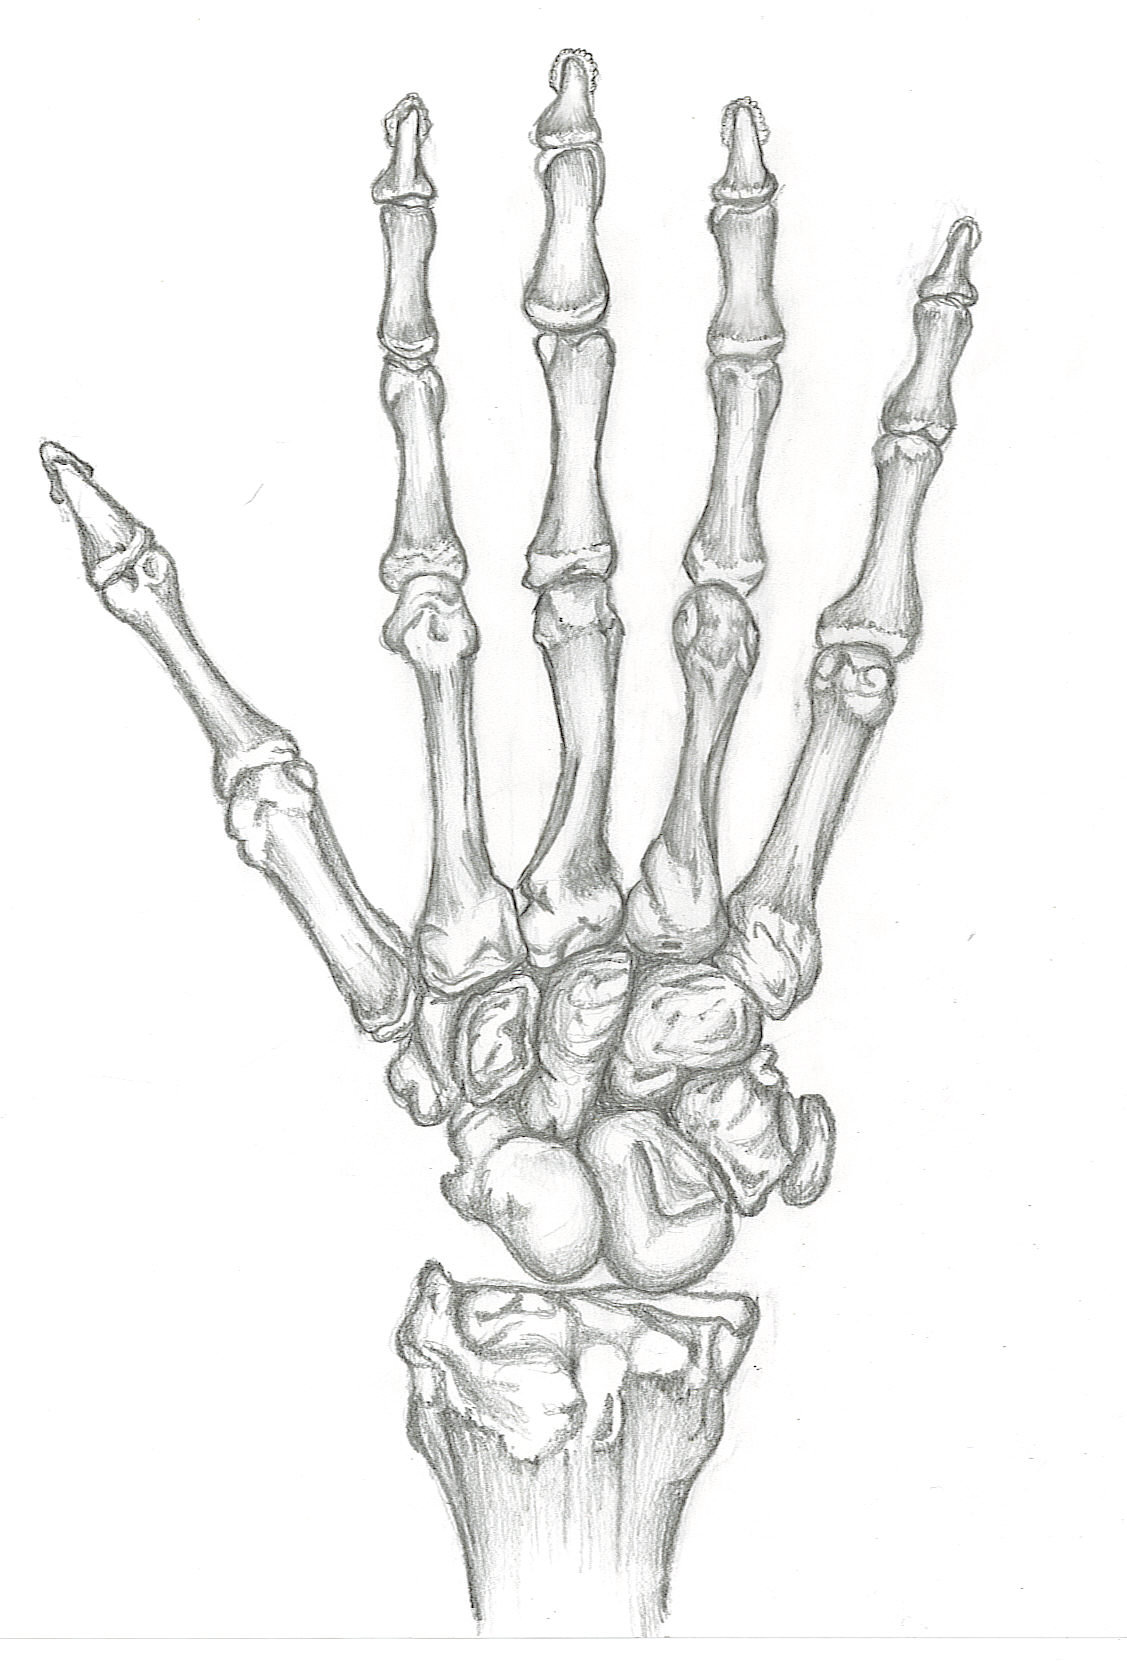 Skeletal Hand Drawing at GetDrawings.com | Free for personal use